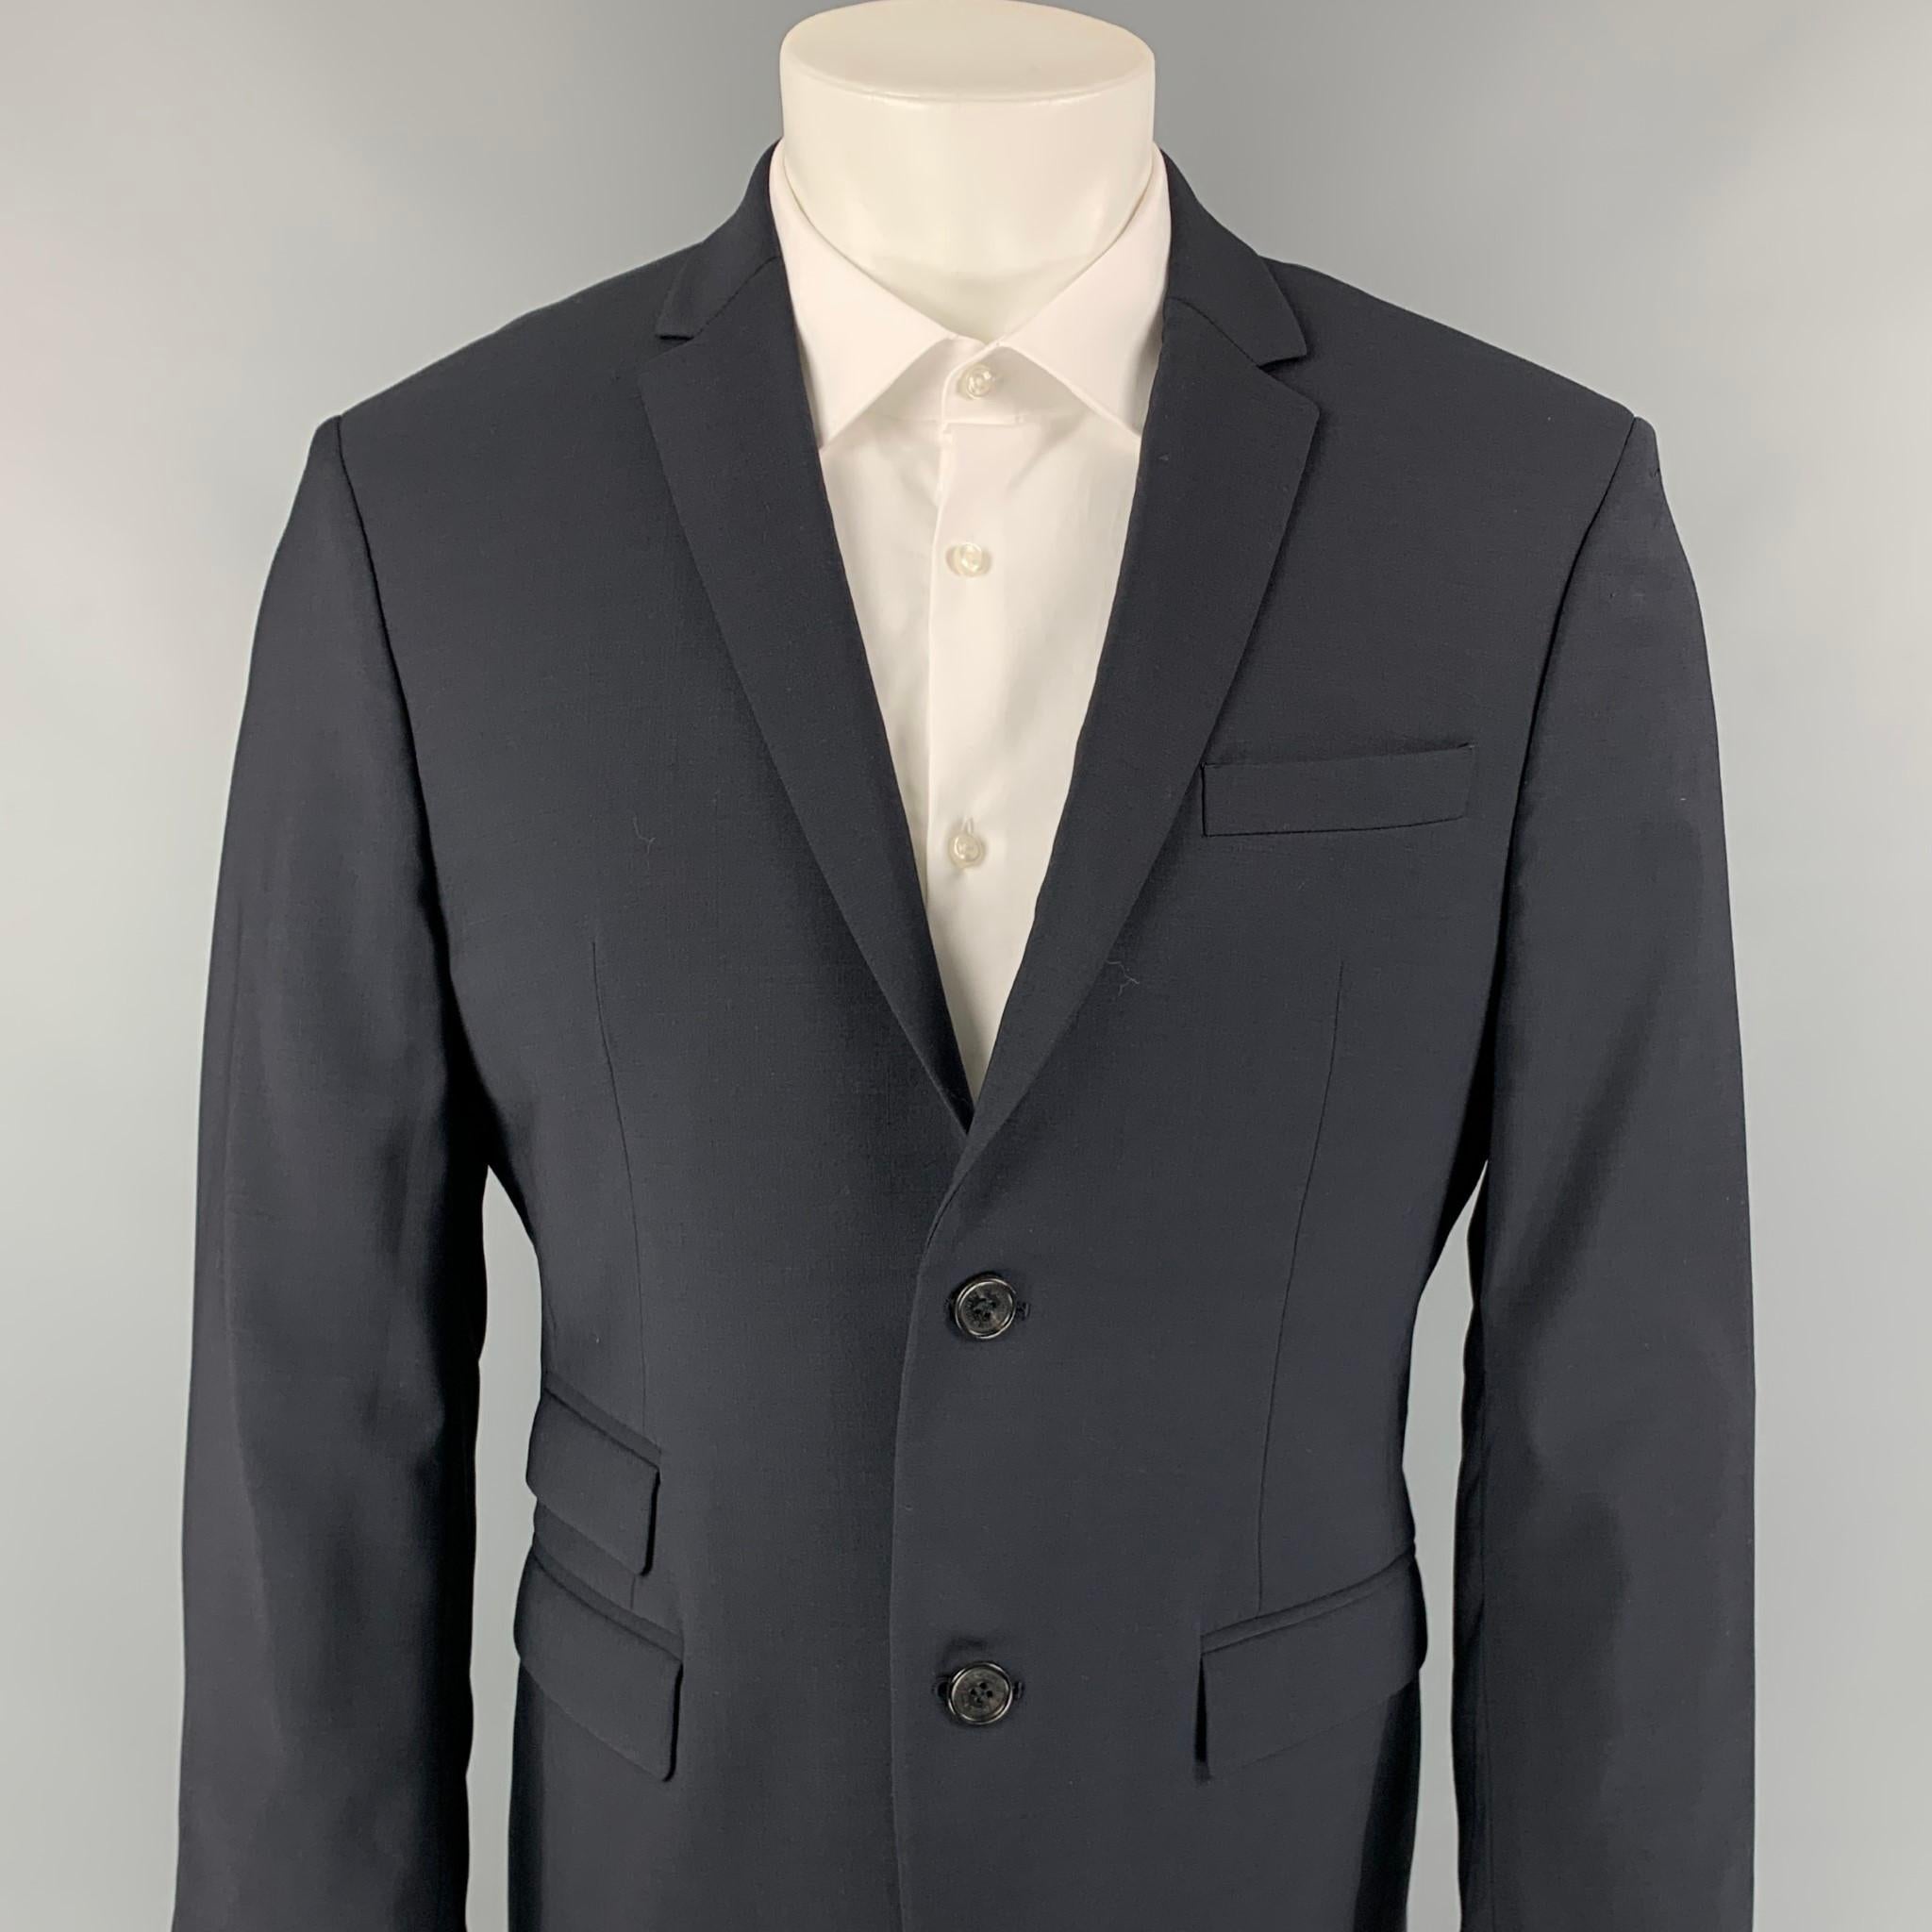 NEIL BARRETT sport coat comes in a navy wool with a full liner featuring a slim fit, notch lapel, double back vent, flap pockets, and a double button closure. Made in Italy. 

Very Good Pre-Owned Condition.
Marked: 50

Measurements:

Shoulder: 18